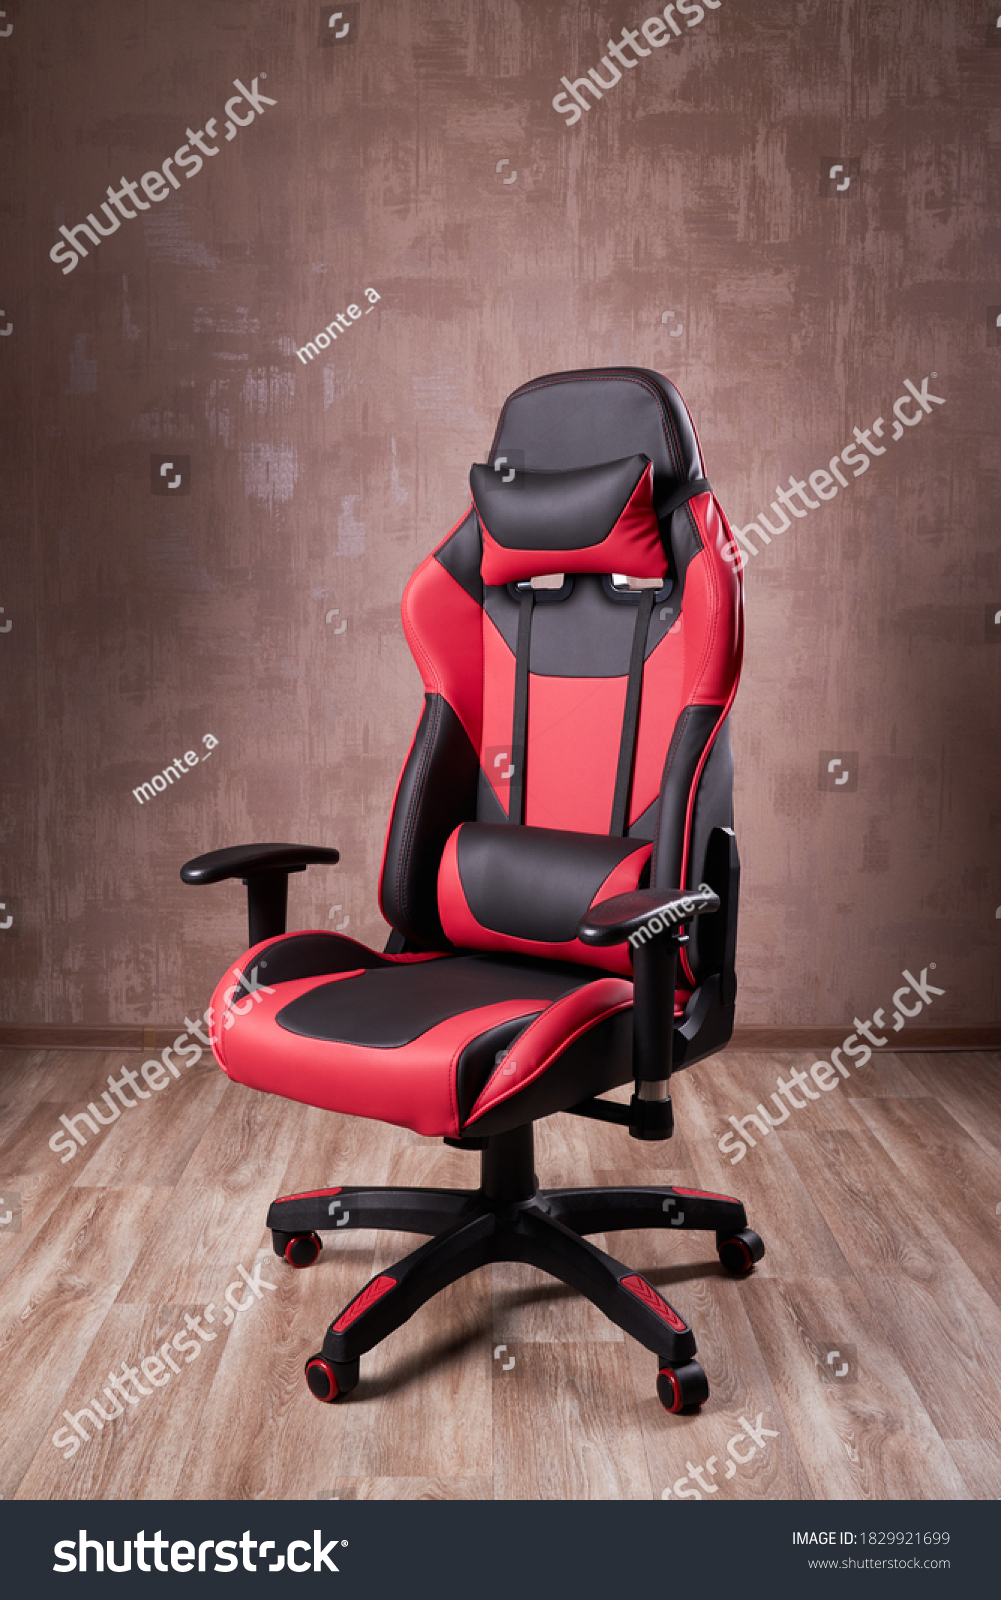 black and red comfortable gaming chair. furniture for computer gamers. #1829921699